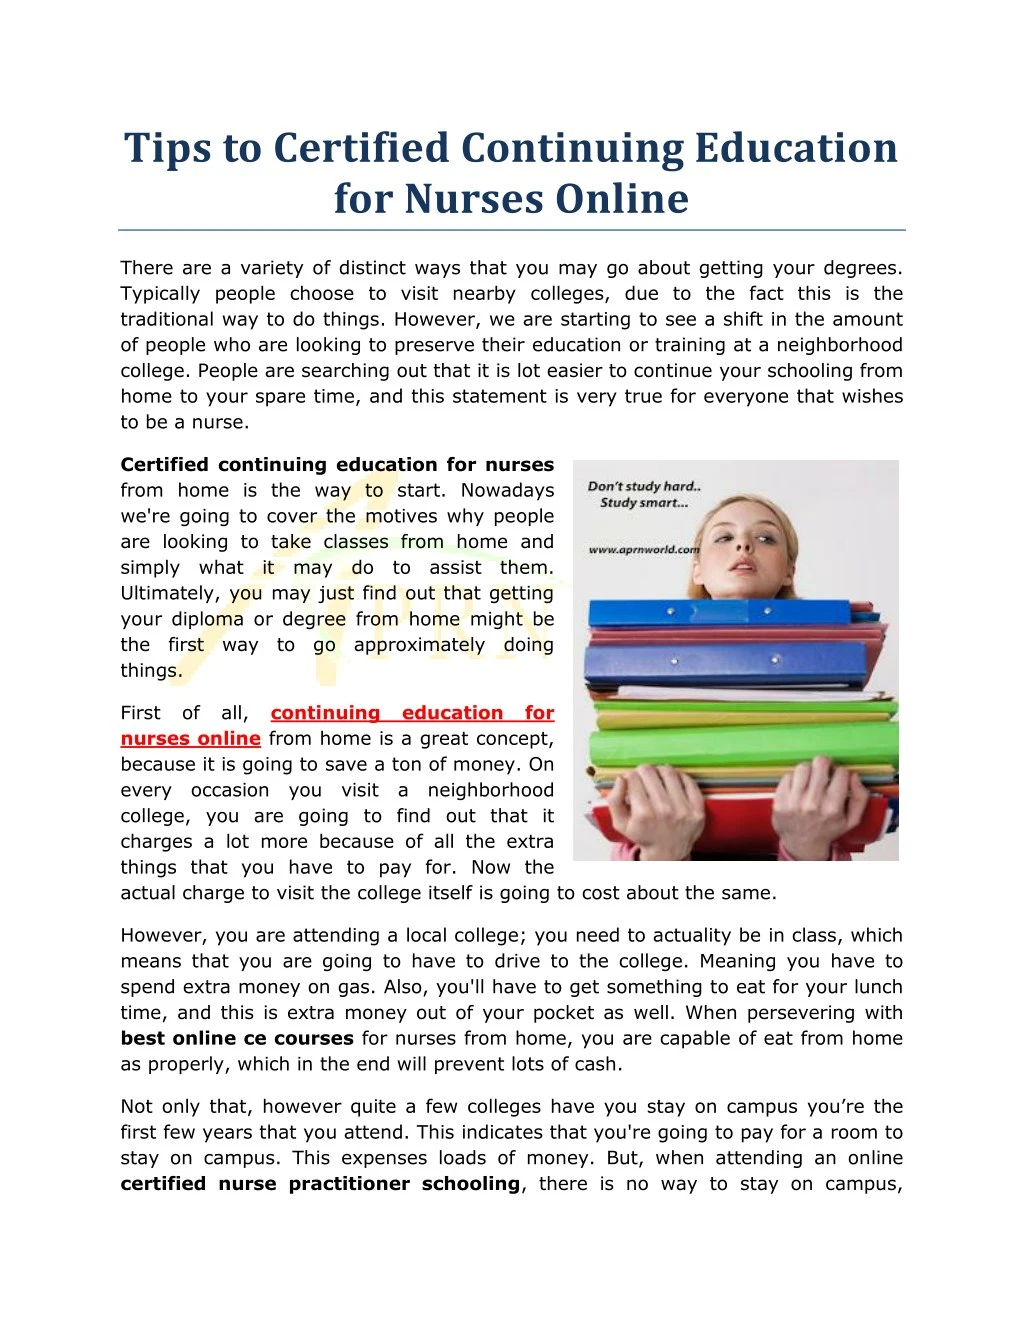 PPT - Tips to Certified Continuing Education for Nurses Online ...